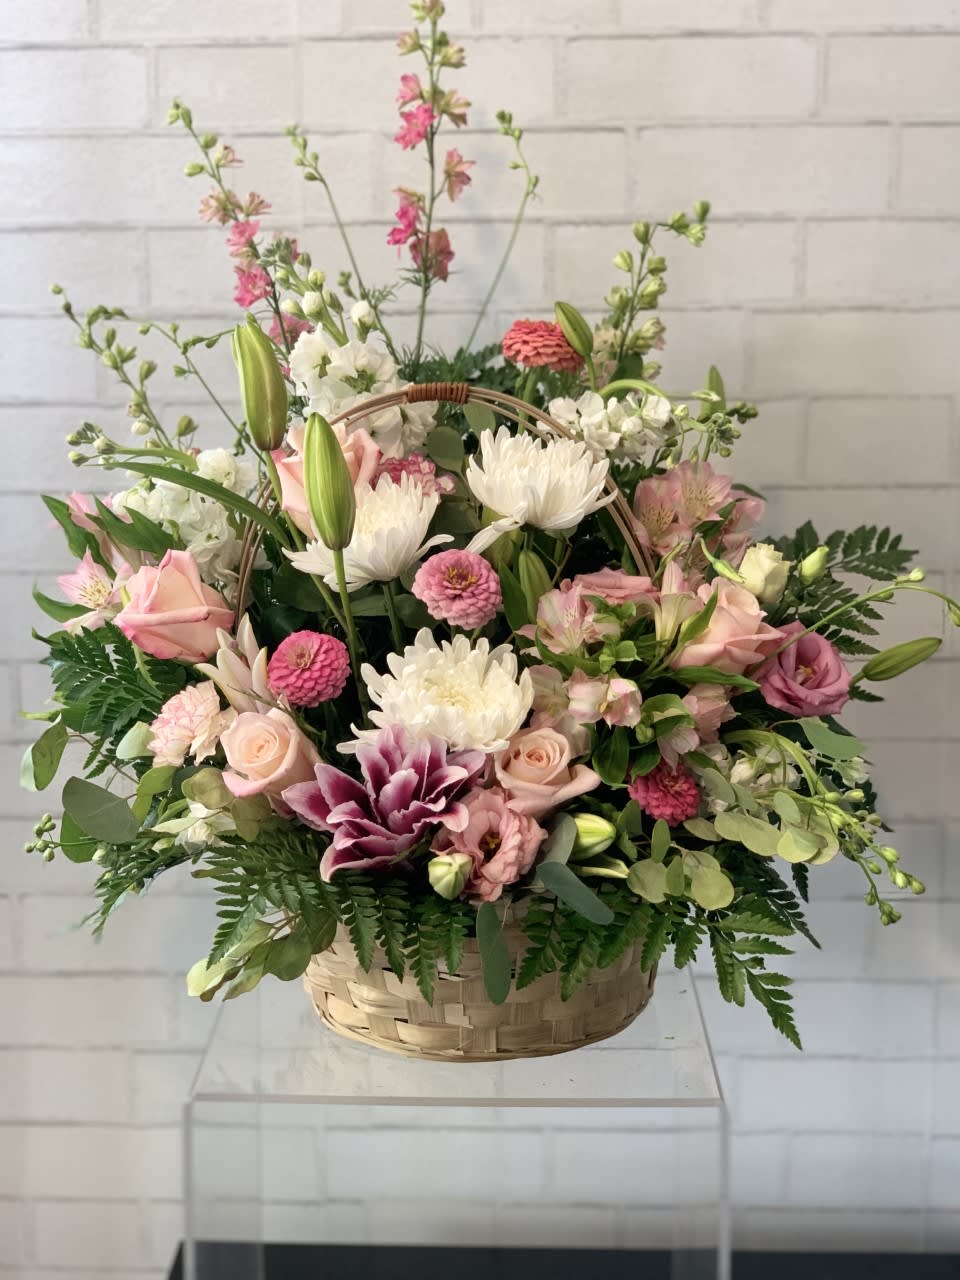 Harmony  - This pink and white funeral basket is a lovely sendoff and tribute. Fitting for any type of ceremony. 